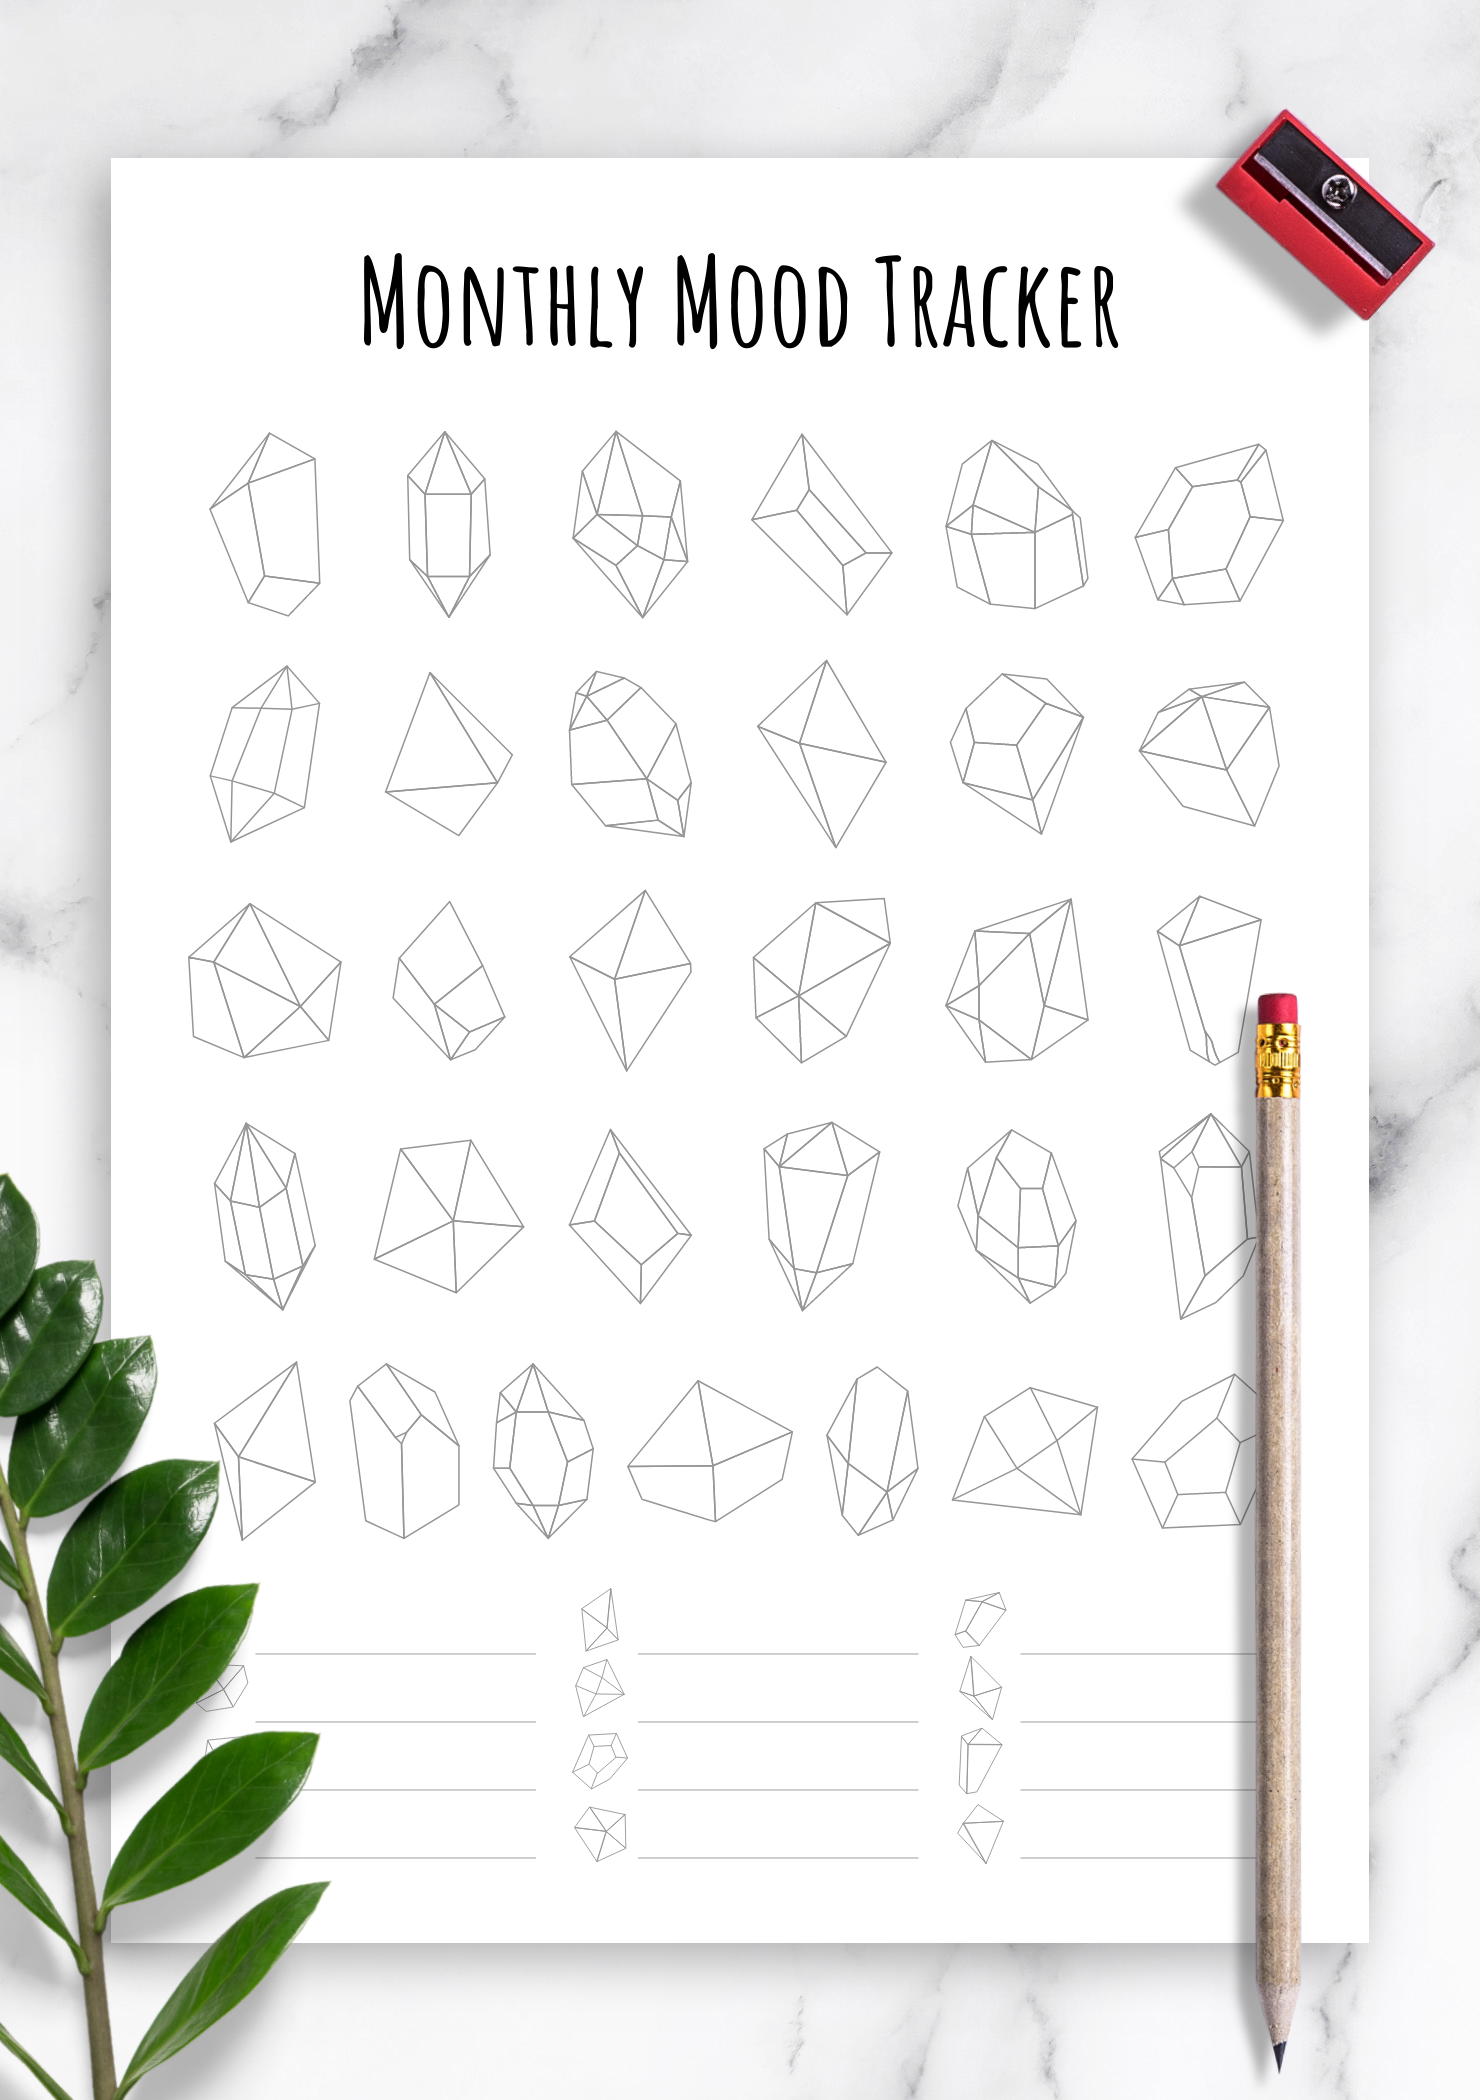 paper-party-supplies-calendars-planners-monthly-mood-tracker-printable-template-pdf-download